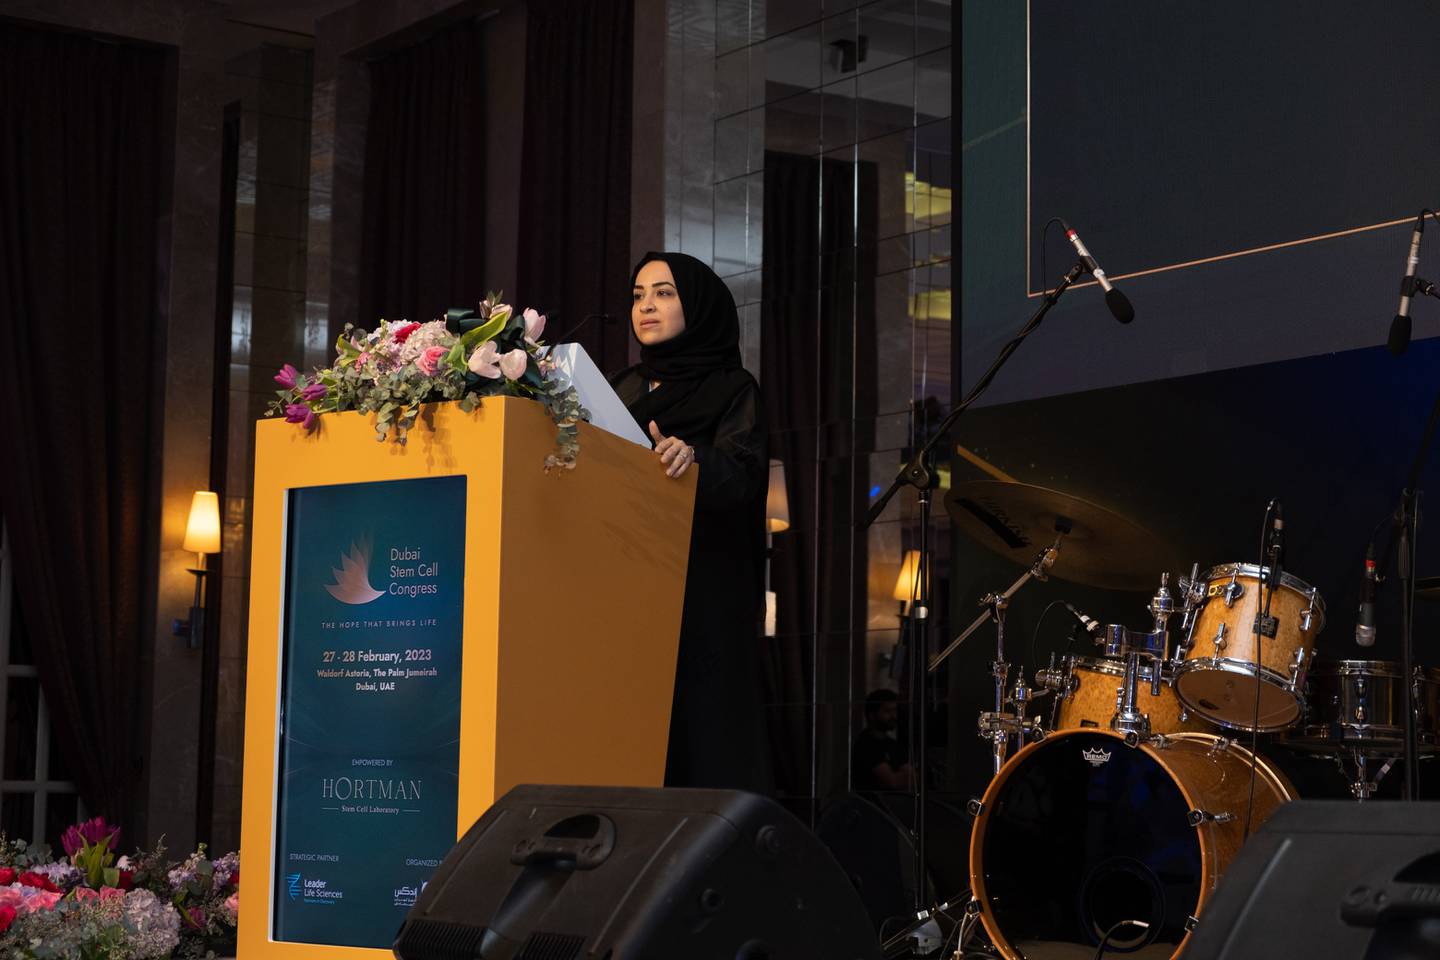 Dr Fatma AlHashimi, director of Hortman Stem Cell Laboratory in Dubai, speaks at the first stem cell congress in Dubai. Hortman Stem Cell Laboratory